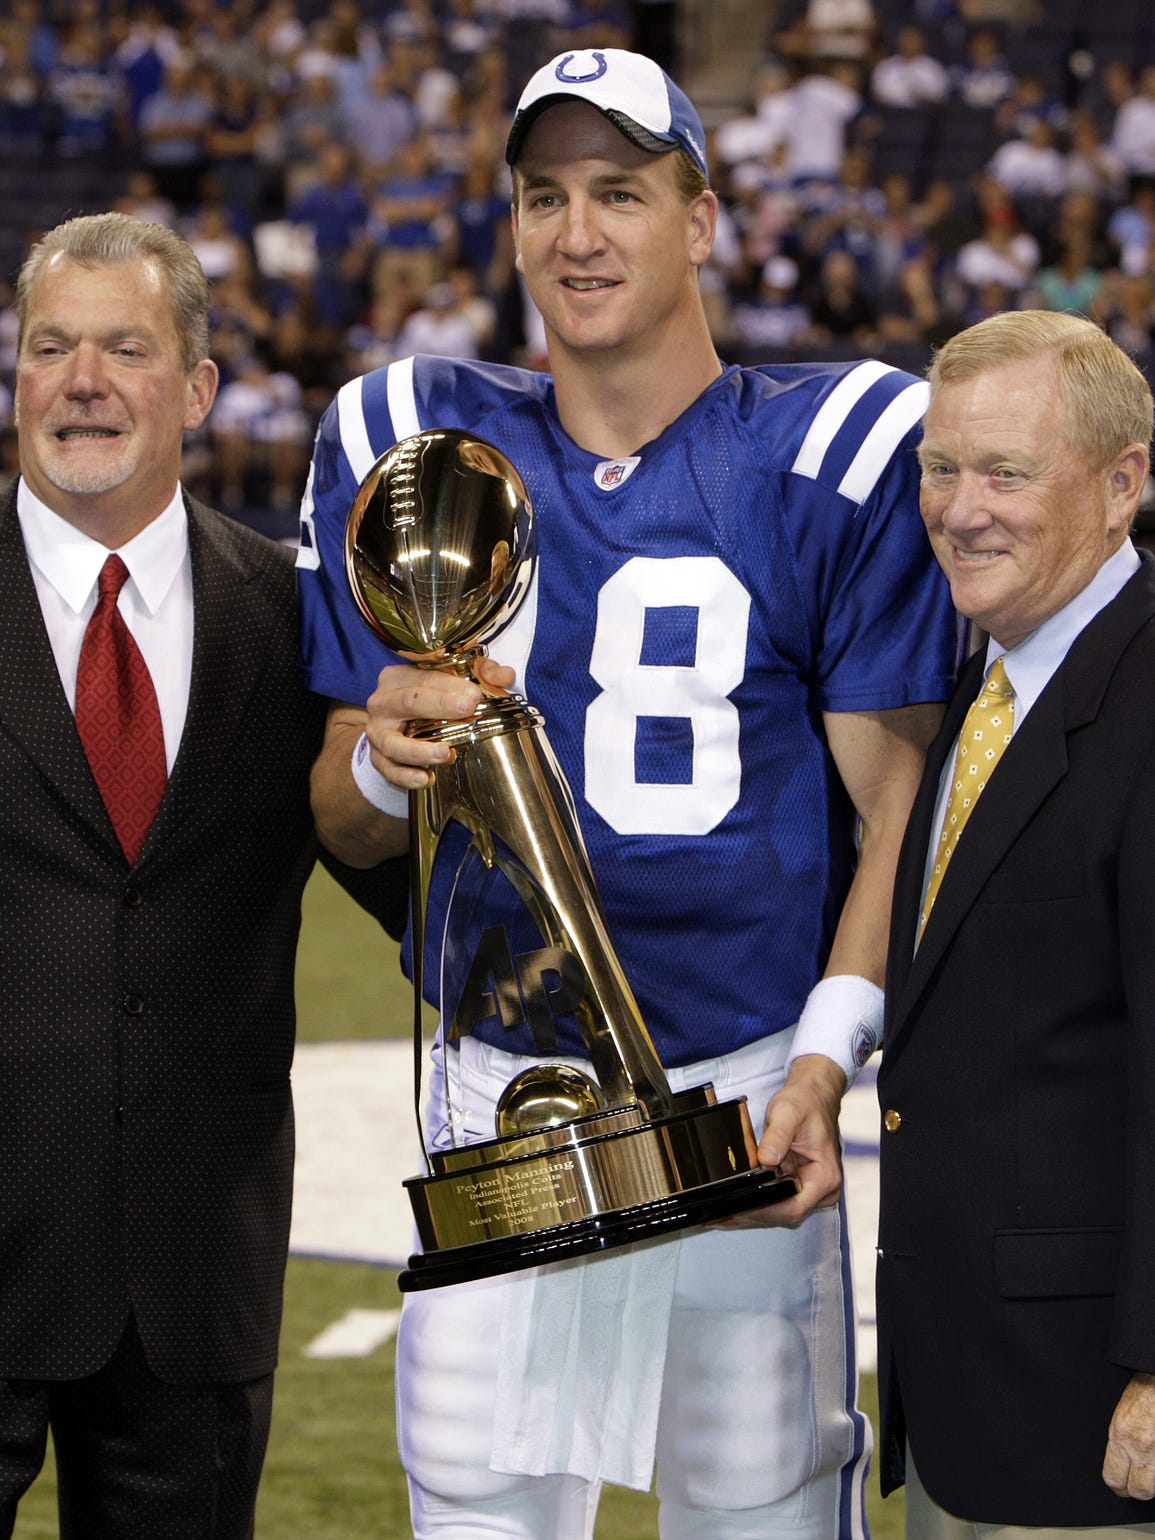 Indianapolis Colts owner Jim Irsay (left) and Colts